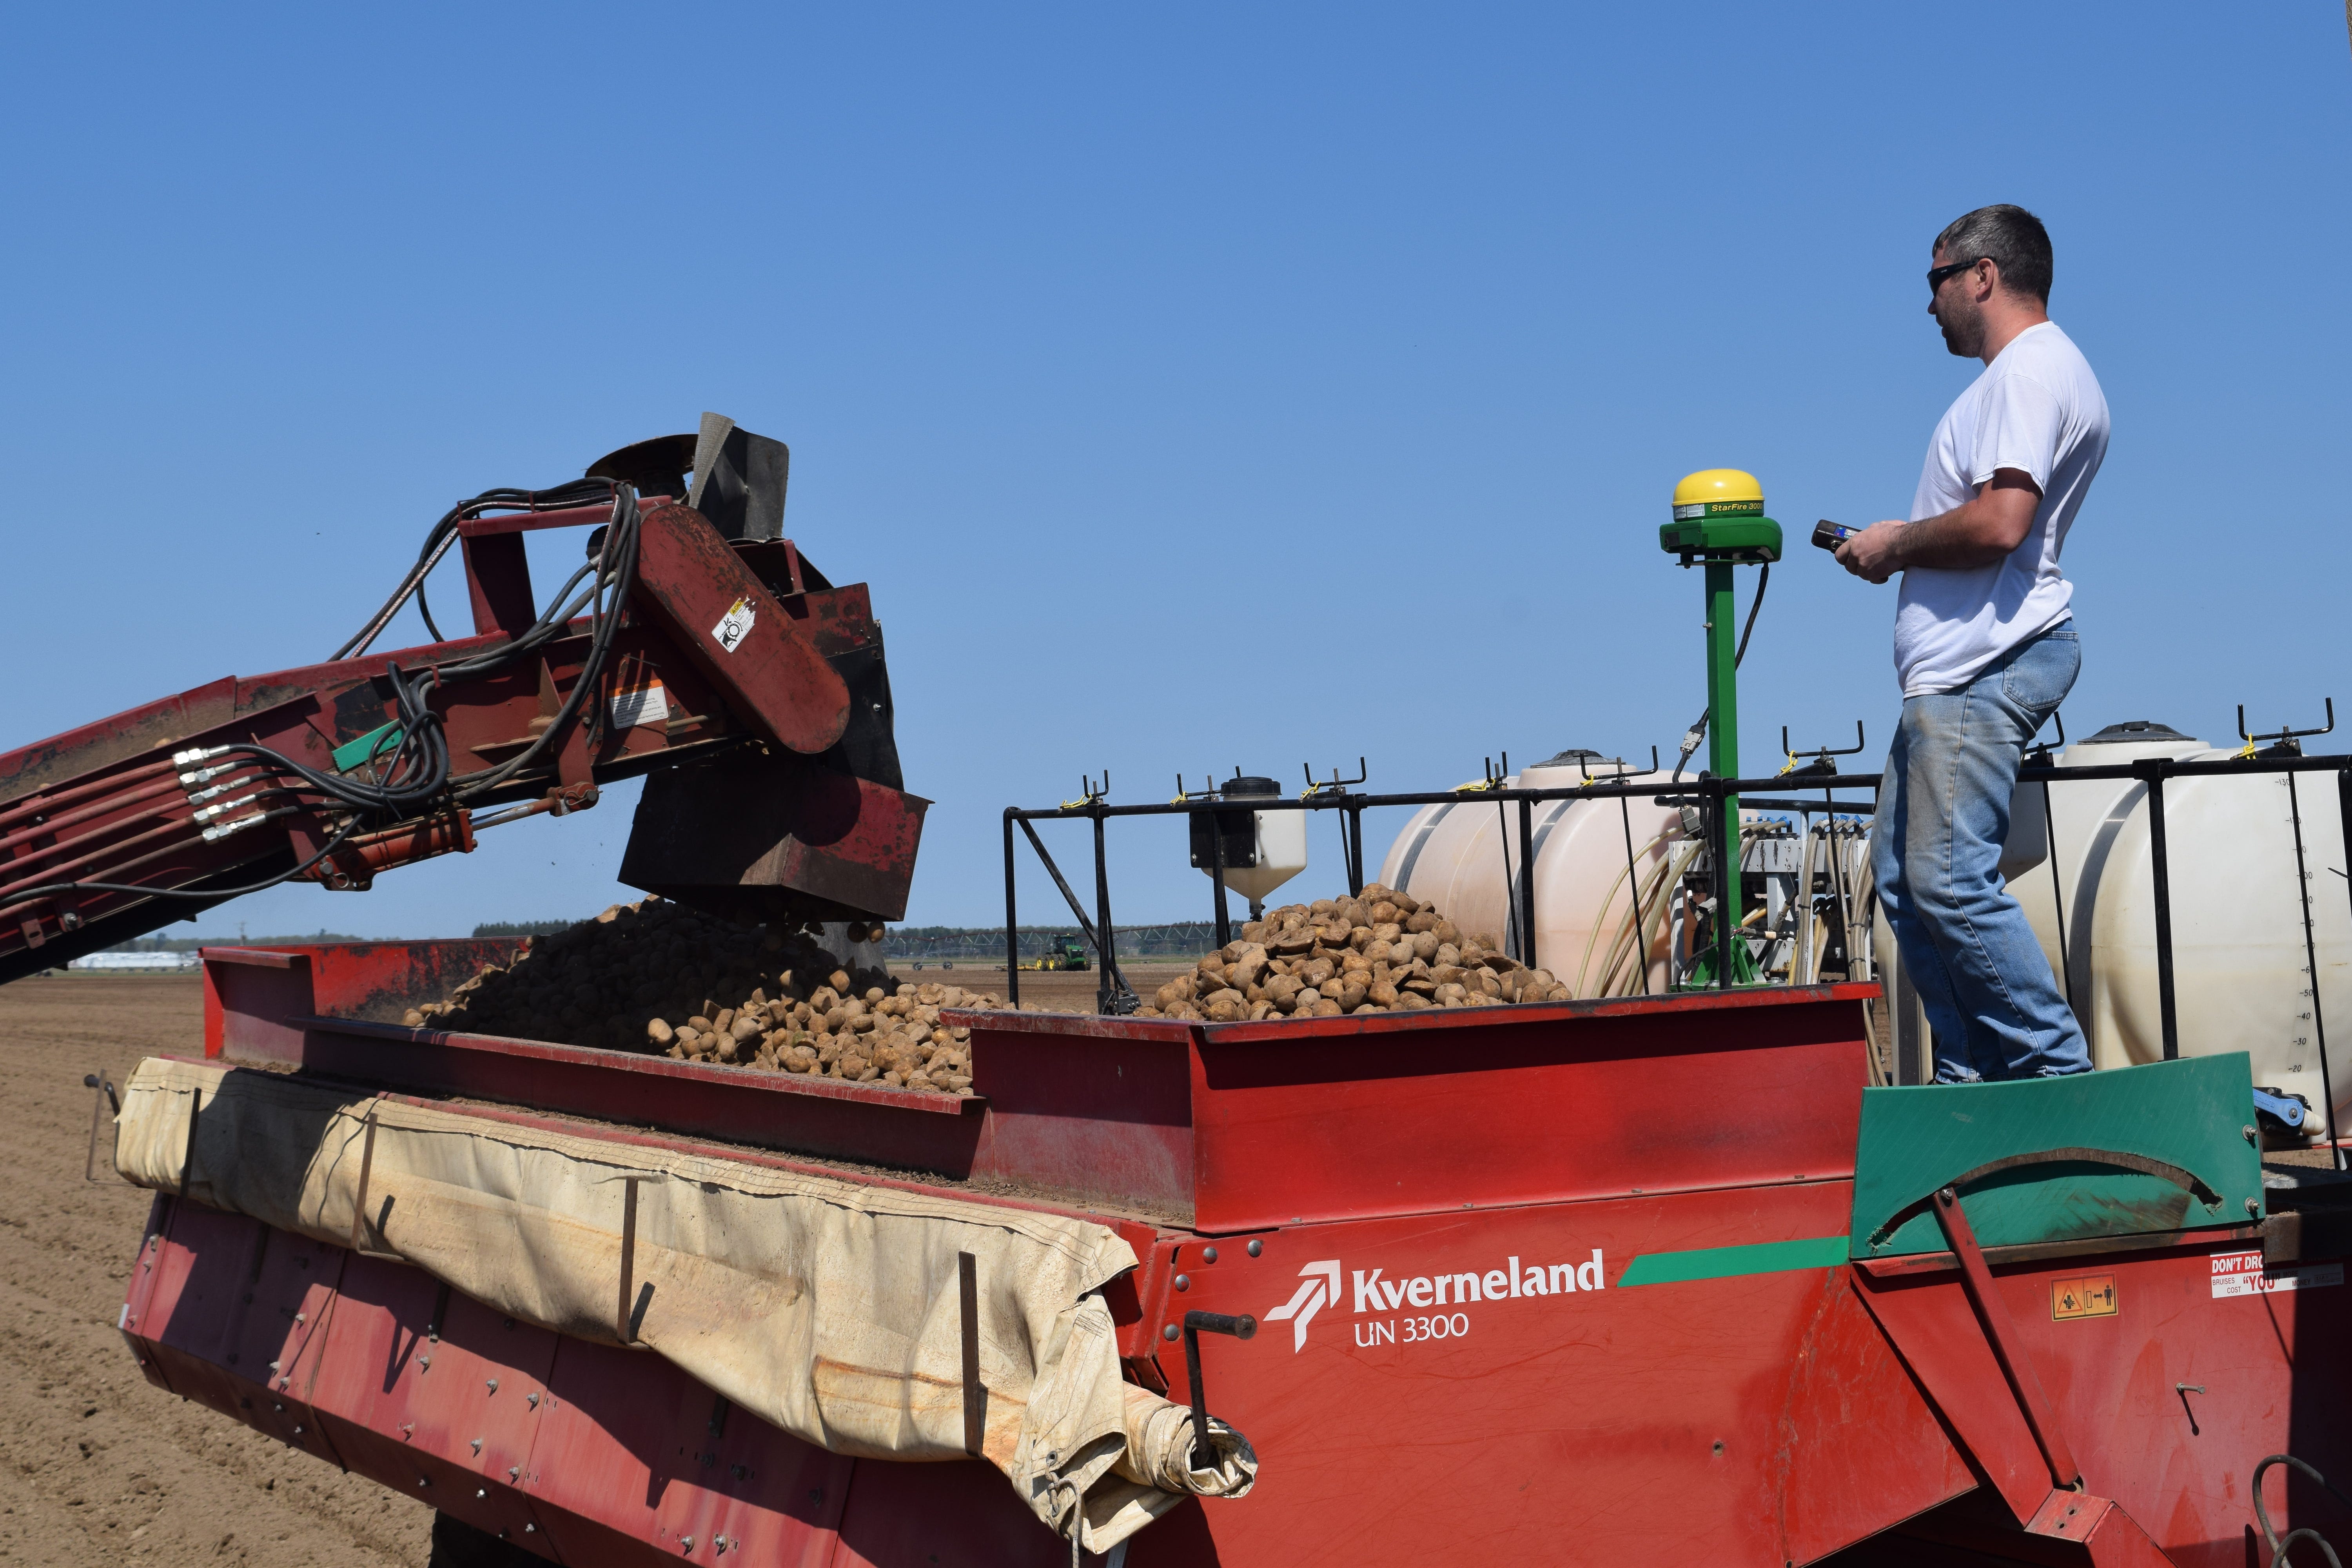 Certified Wisconsin seed potatoes are loaded into a Kverneland UN 3300 planter as Joe Augustine looks on at the Schroeder Brothers Farms, Inc., in Antigo, Wis.